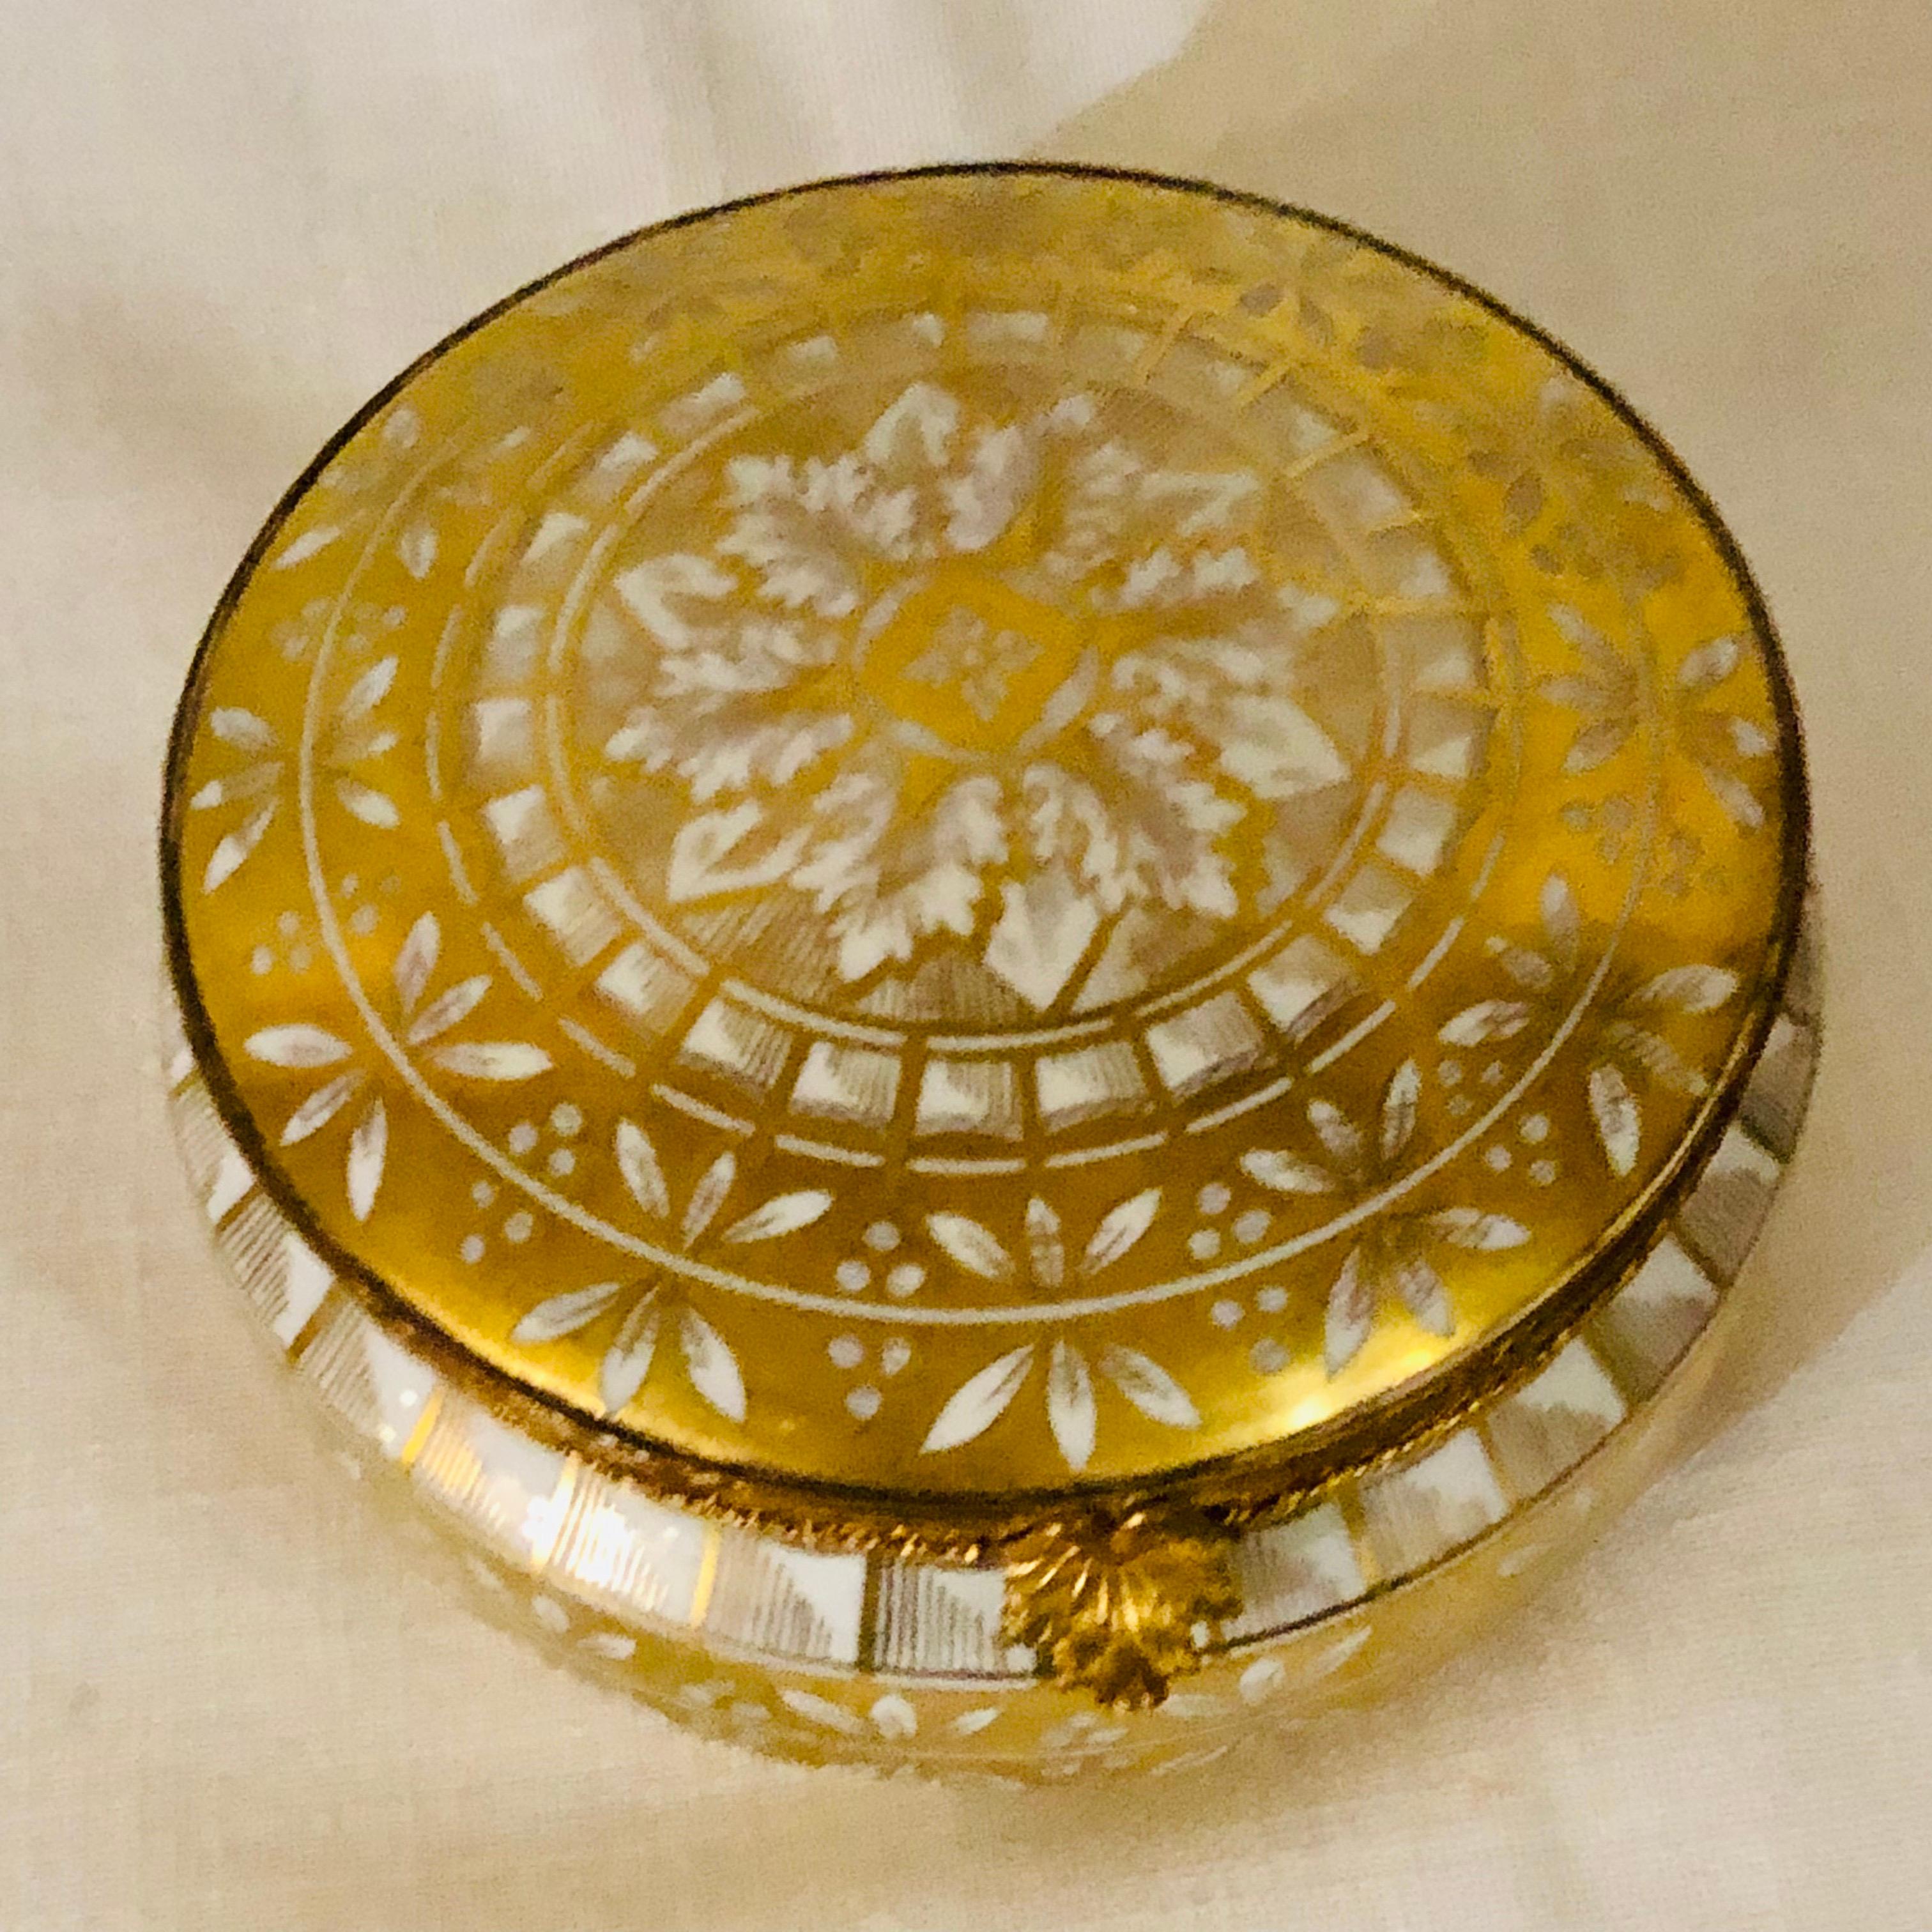 French Le Tallec Porcelain Box with Gold Painted Decoration on a White Porcelain Ground